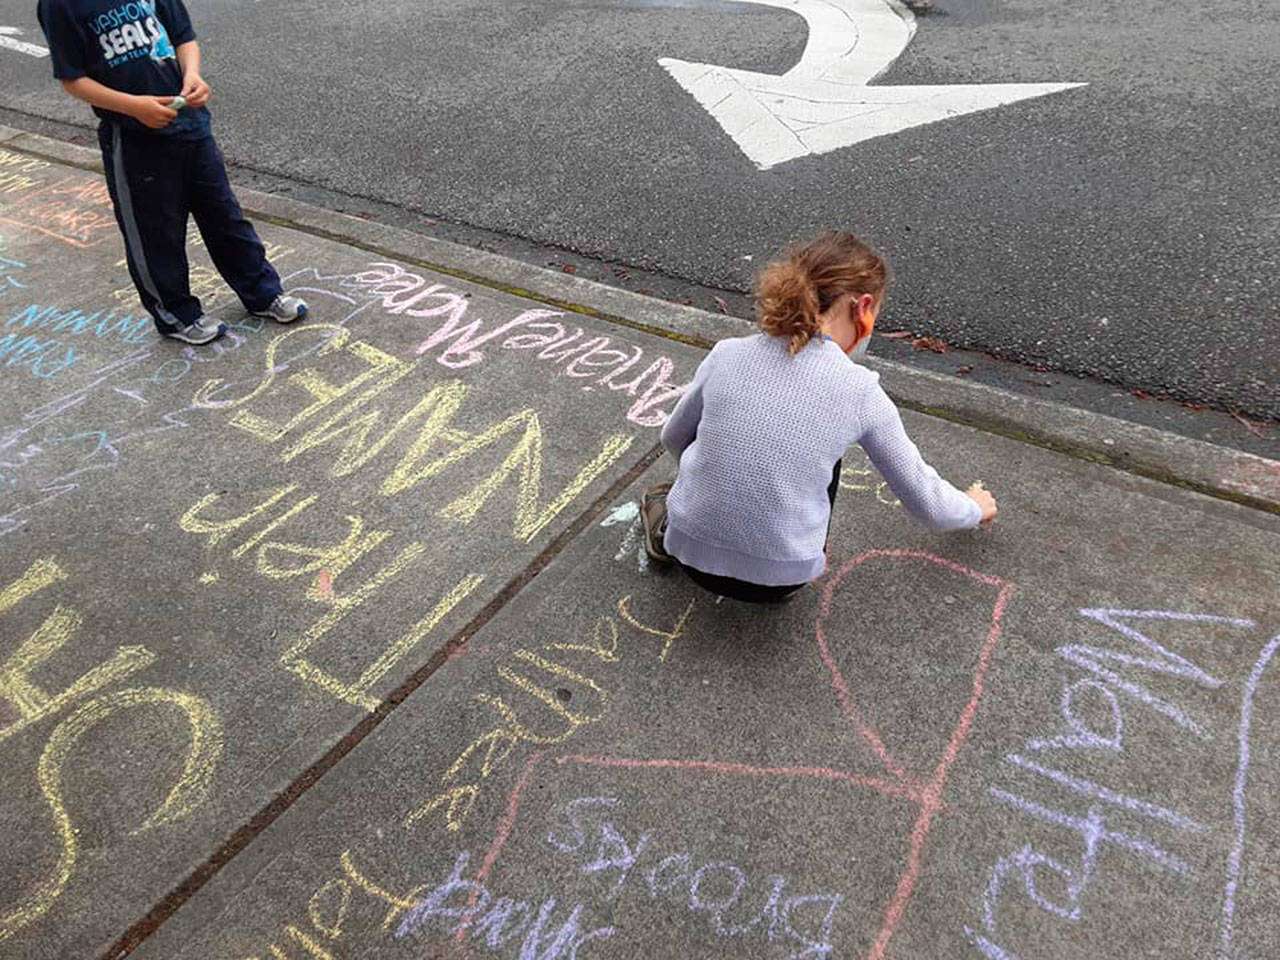 Last year’s “Chalk the Walk” event drew enthusiastic participants, despite drizzly weather (Courtesy Photo).